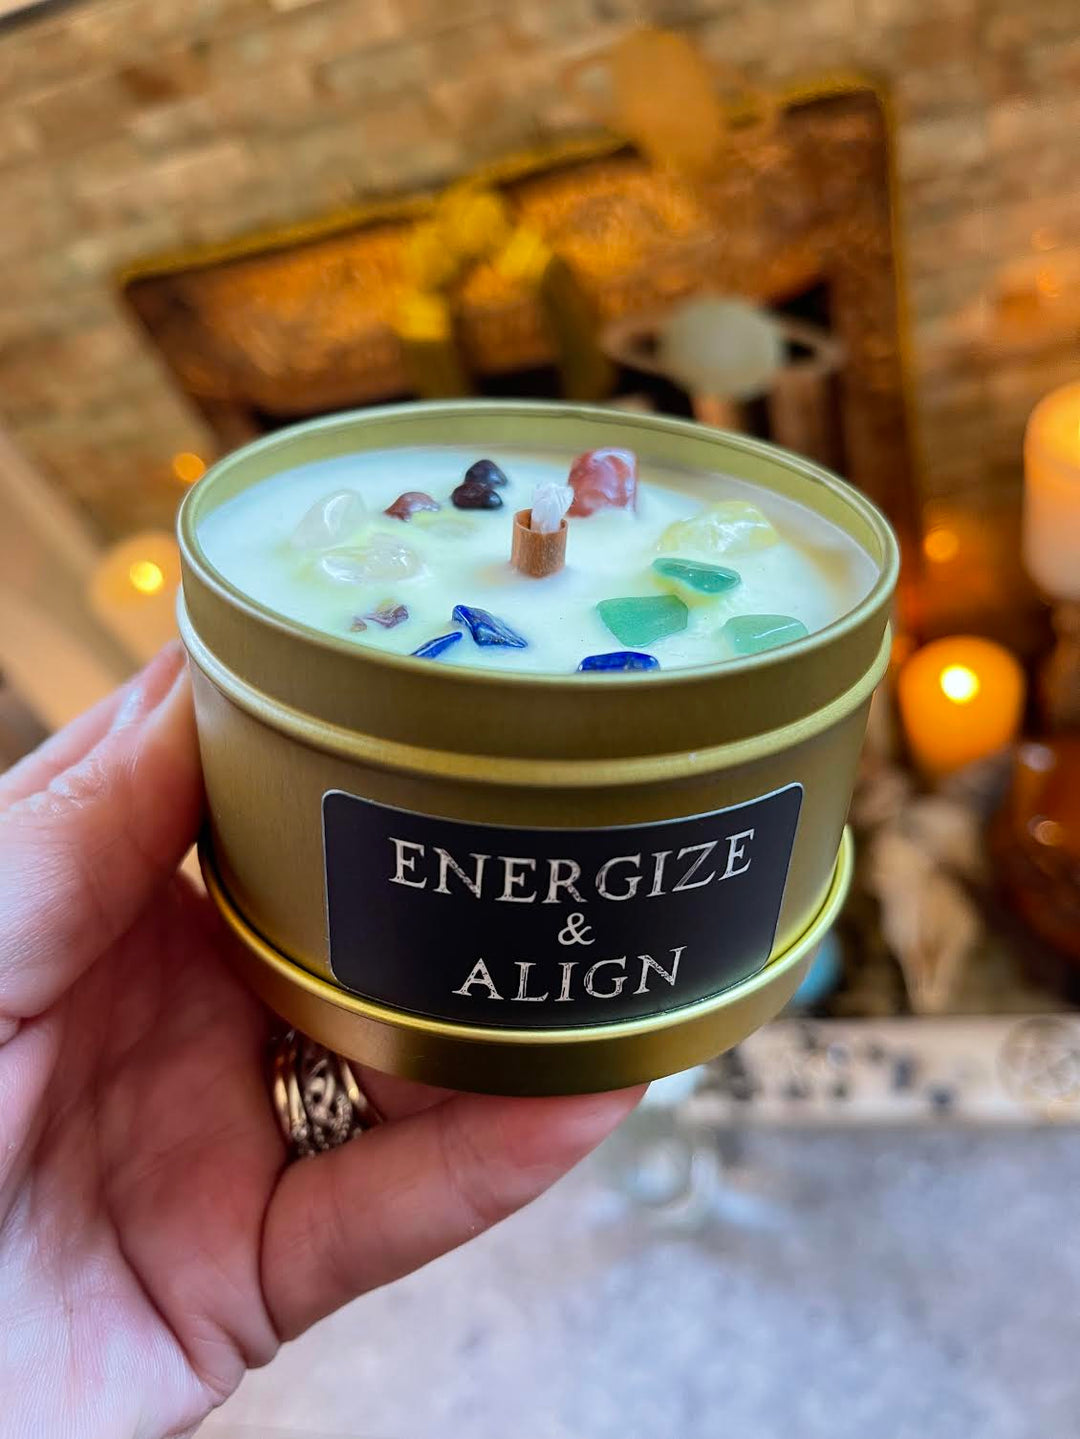 This is the front of the Energize and Align candle